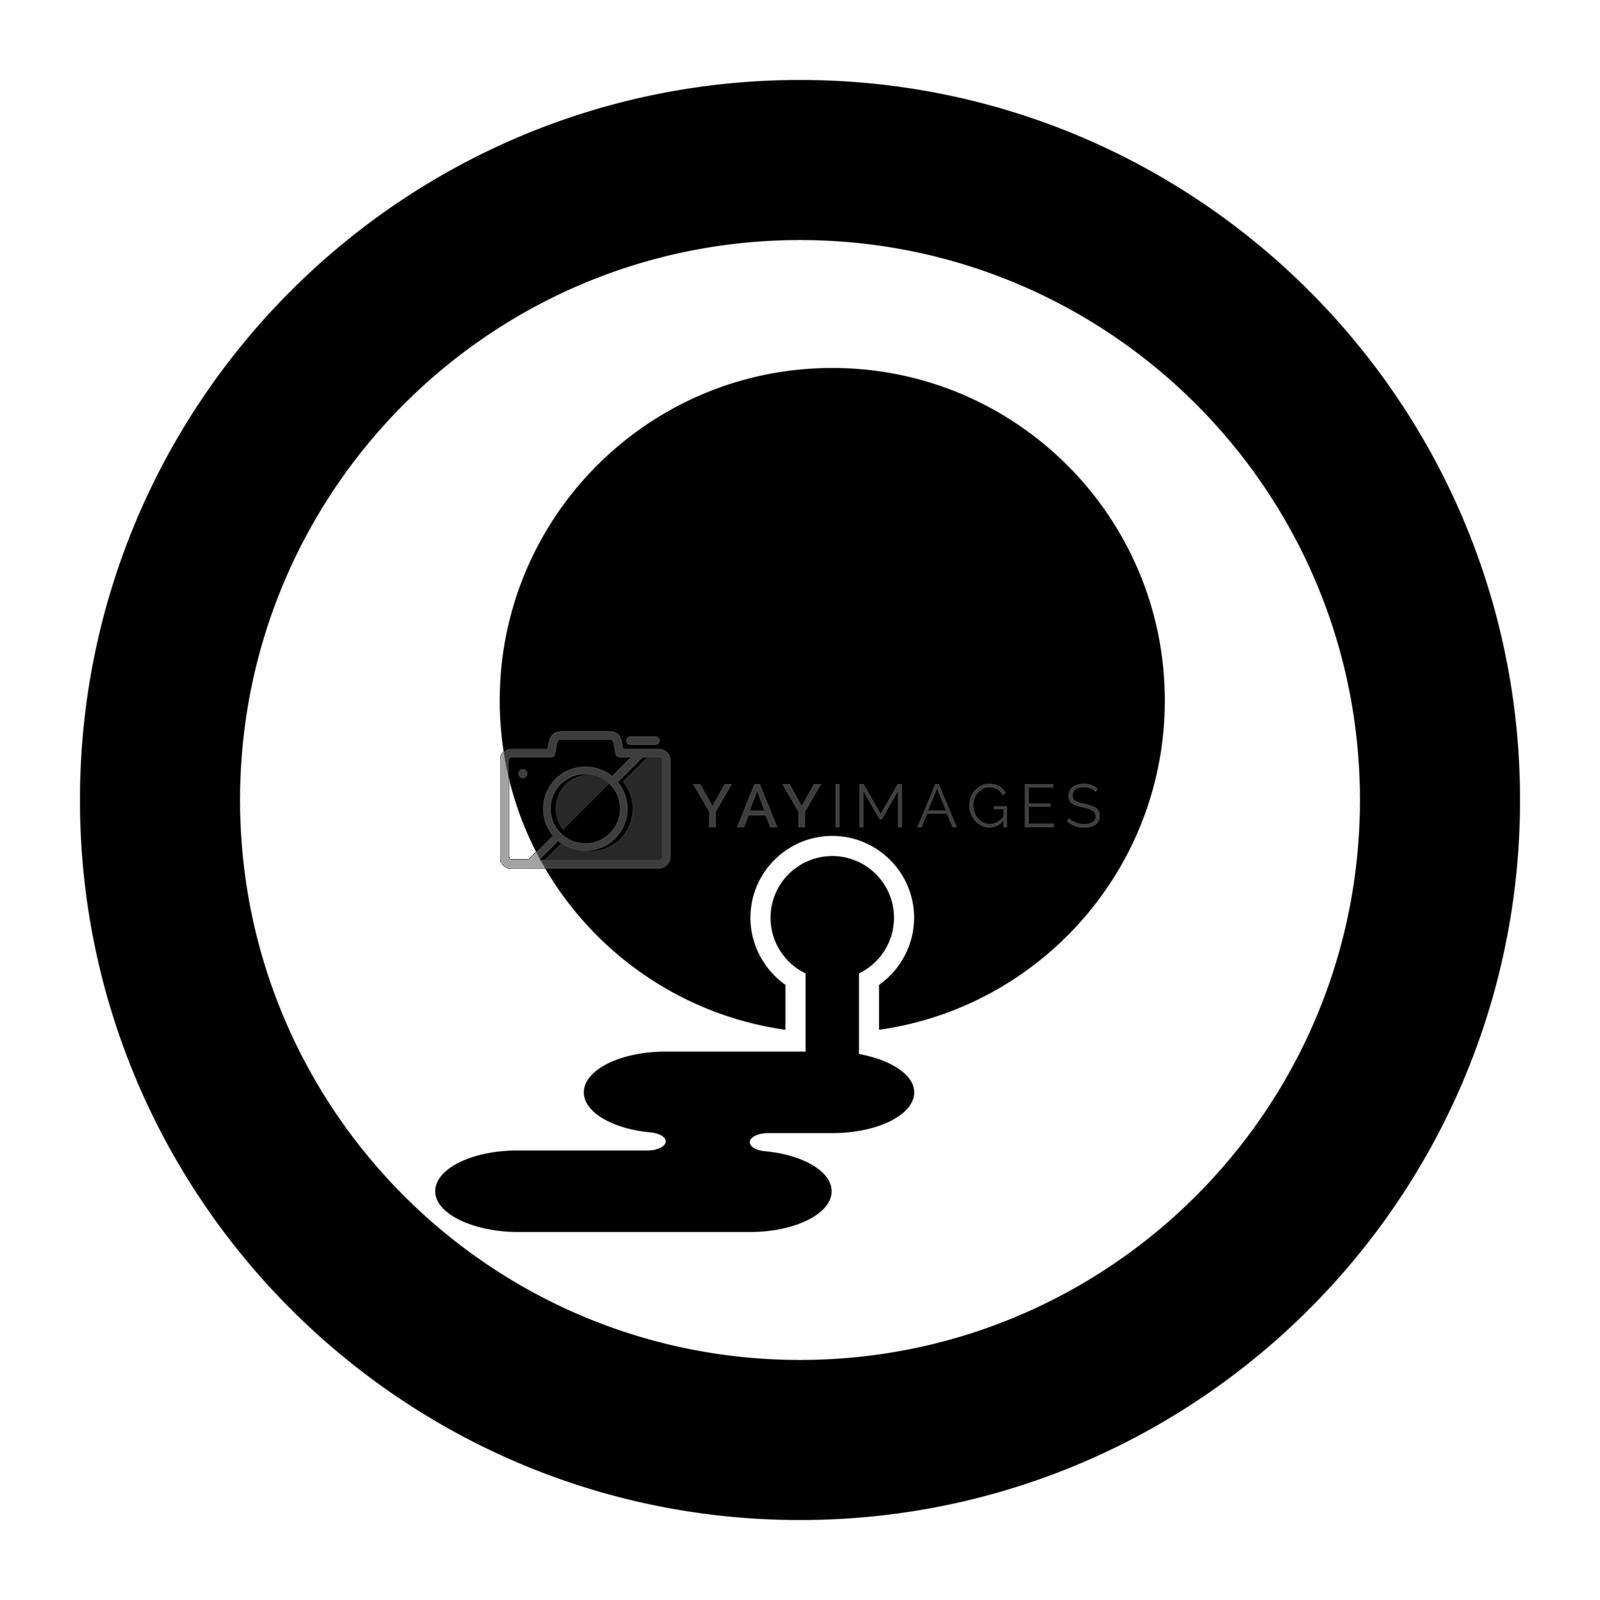 Royalty free image of Oil flowing from barrel fuel flows out Environmental pollution crude spill icon in circle round black color vector illustration image solid outline style by serhii435